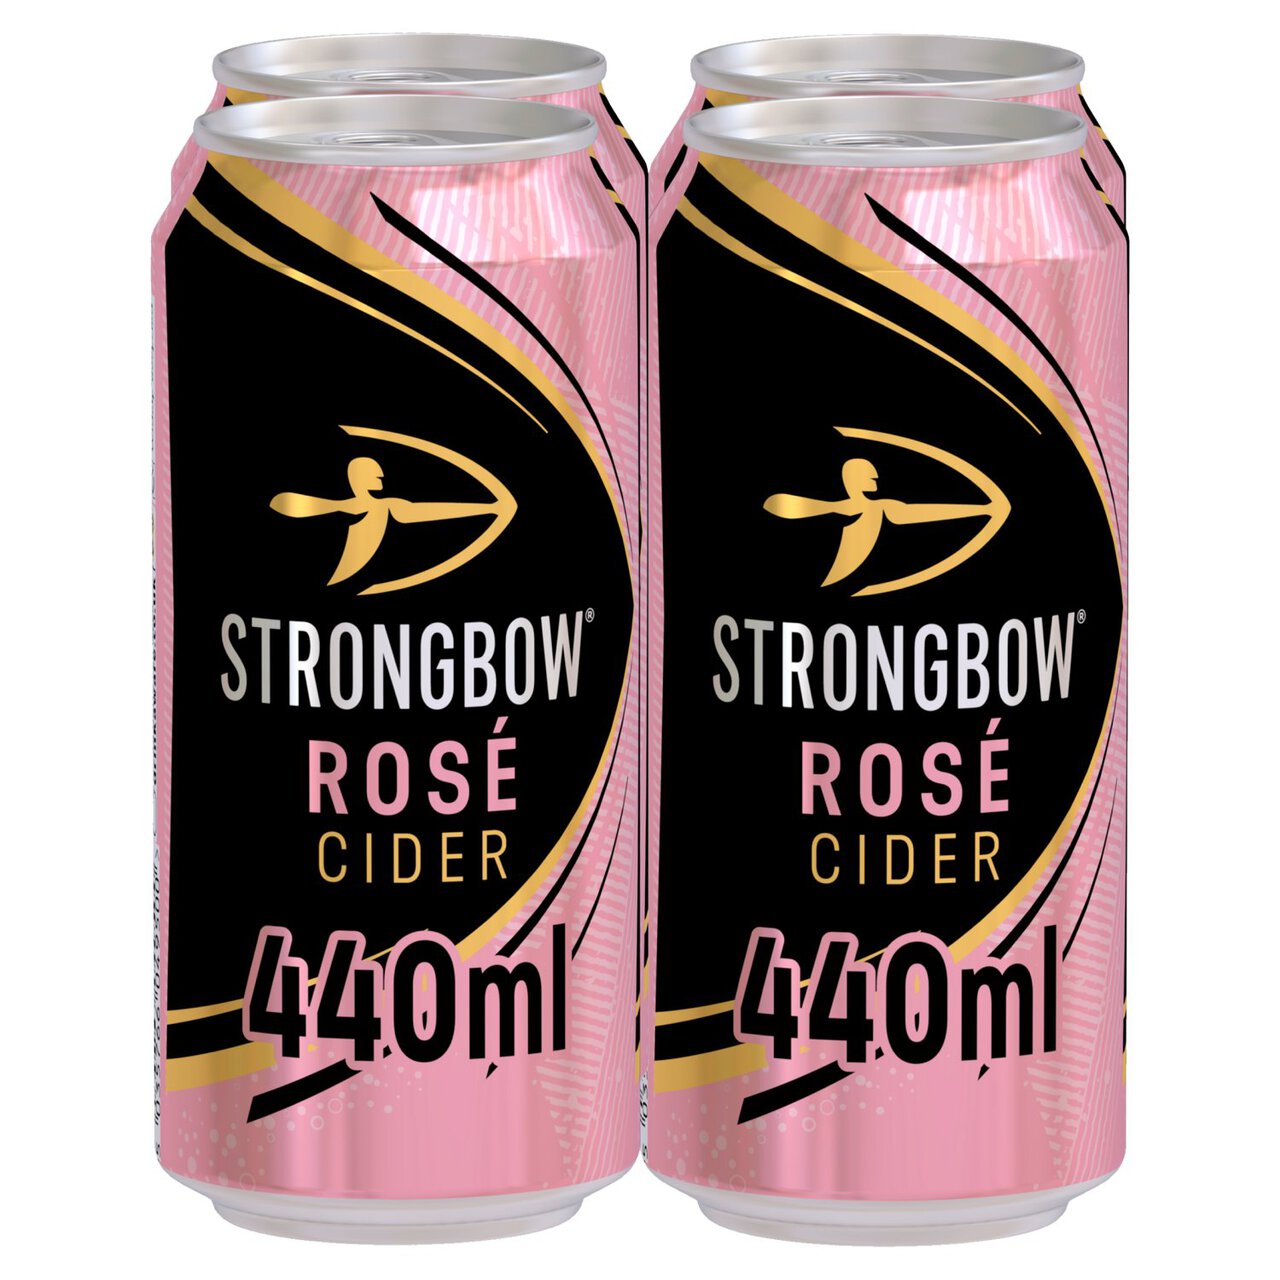 Strongbow Rose Cider 4 x 440ml